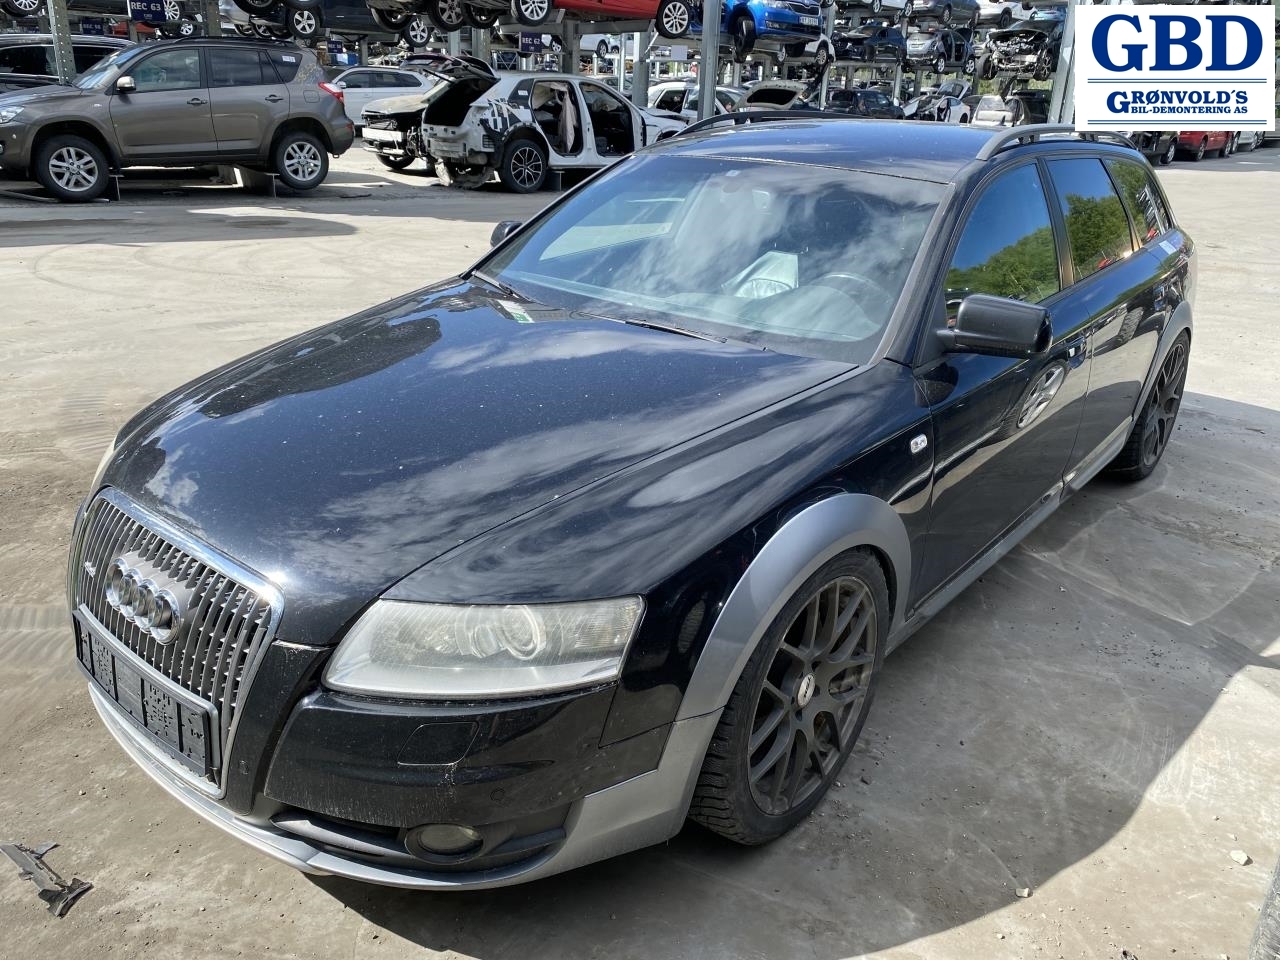 Audi A6, Allroad, 2006-2008 (Type II, Fase 1) (C6) parts car, Engine code: ASB, Gearbox code: JMQ